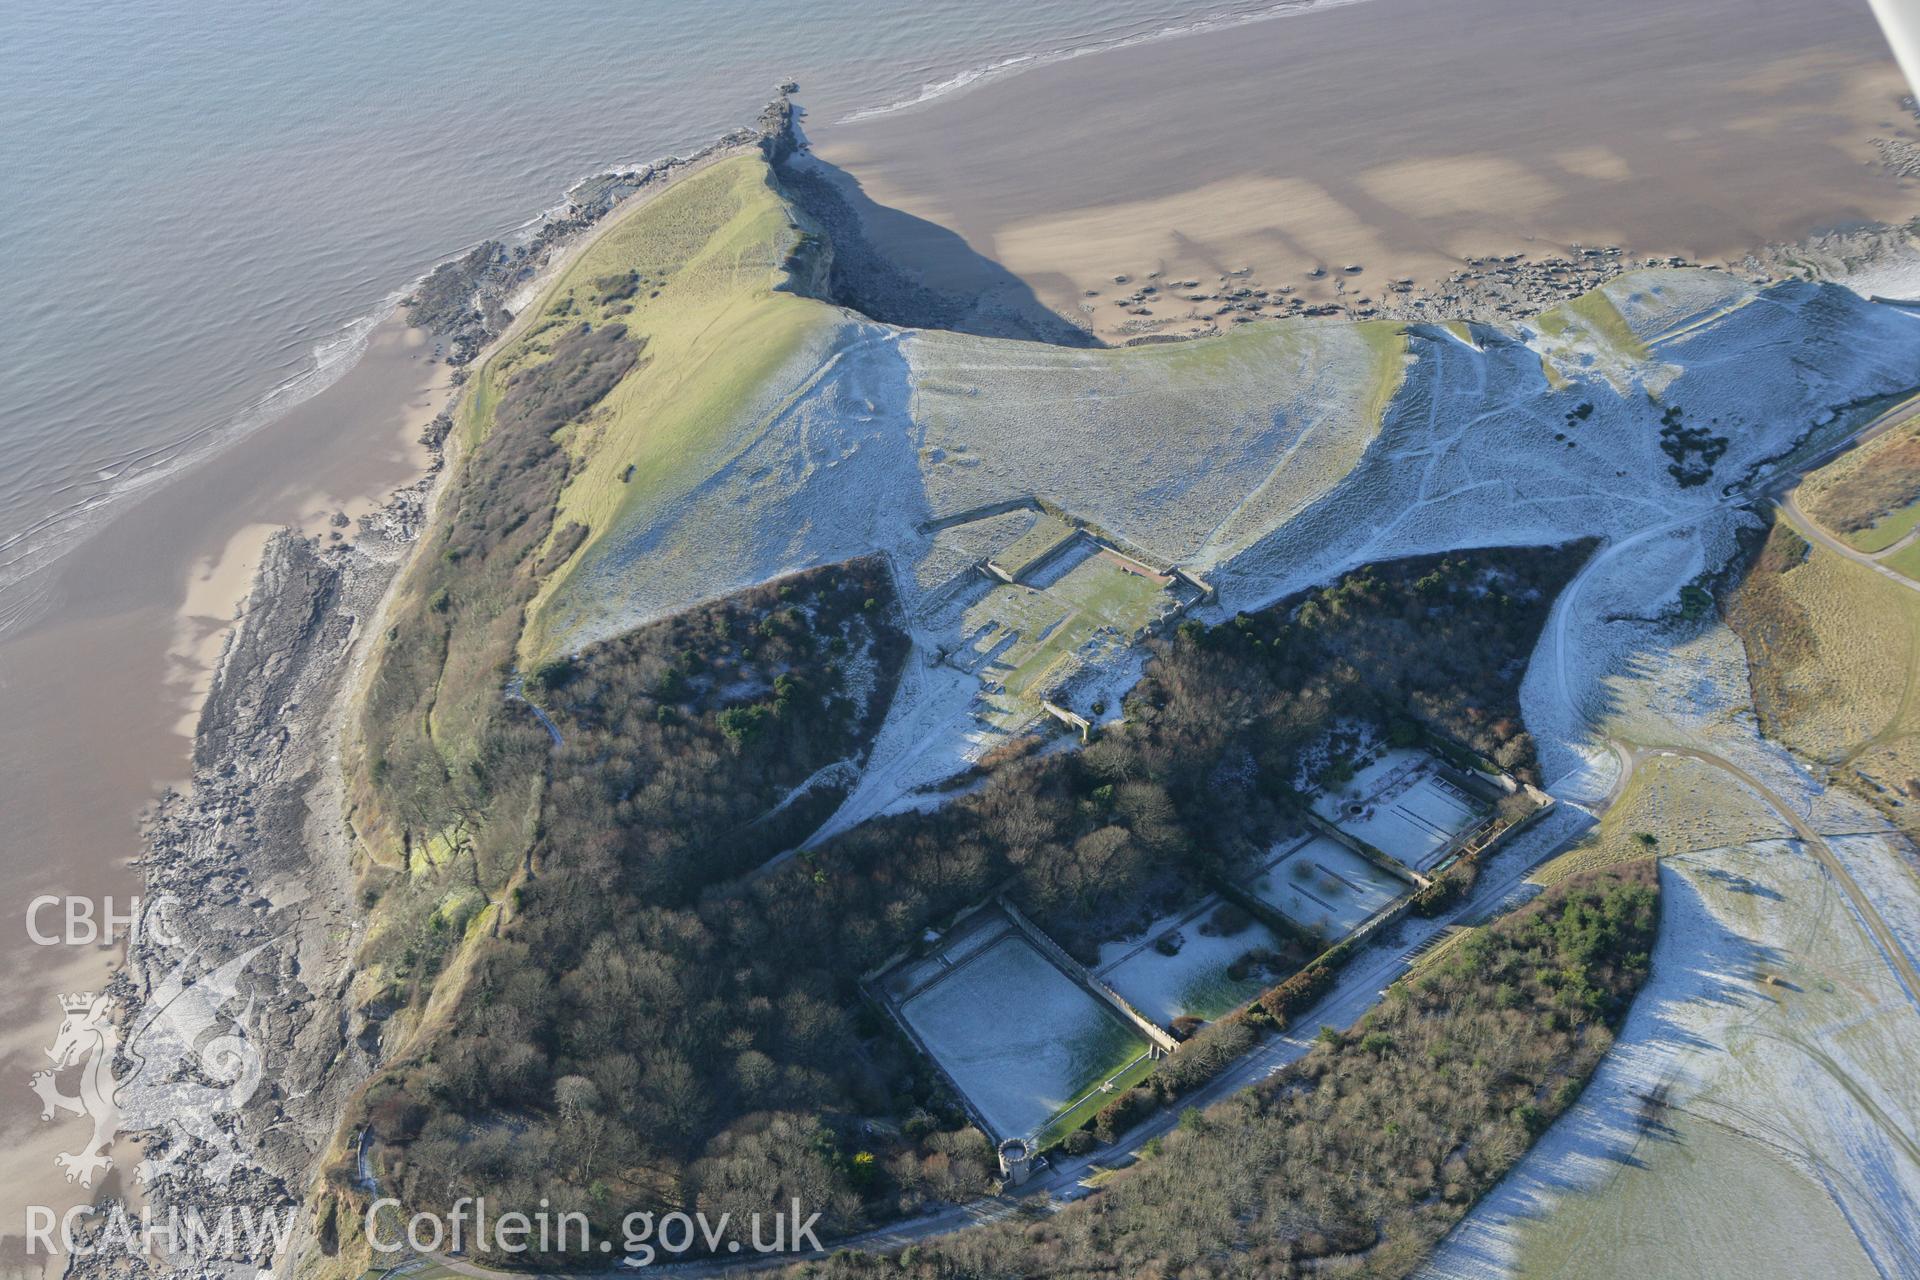 RCAHMW colour oblique photograph of Dunraven Hillfort, and south Glamorgan coast. Taken by Toby Driver on 08/12/2010.